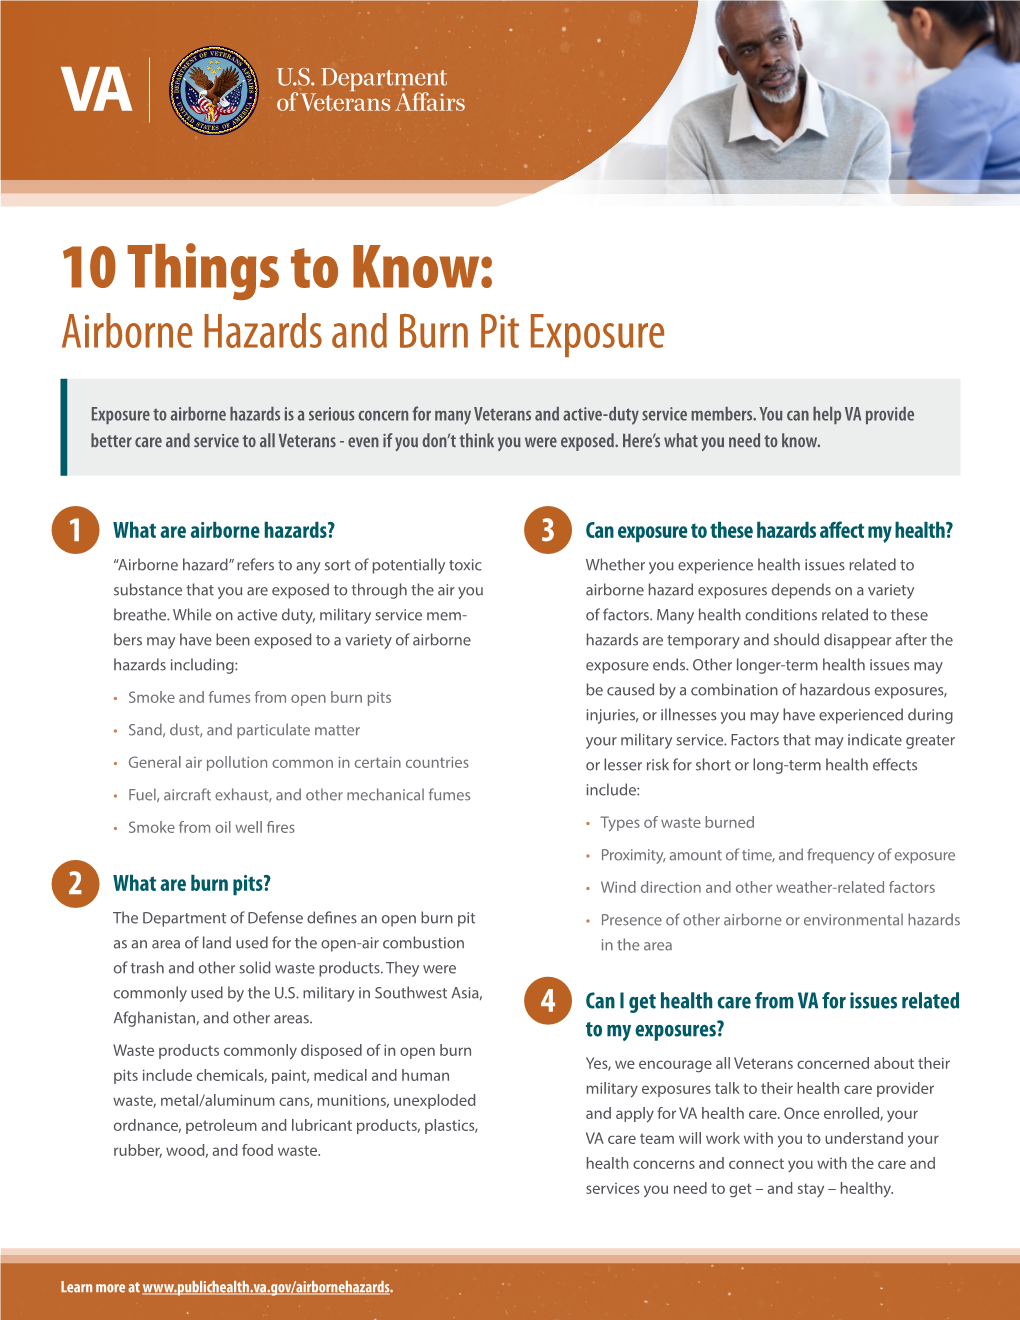 10 Things to Know: Airborne Hazards and Burn Pit Exposure